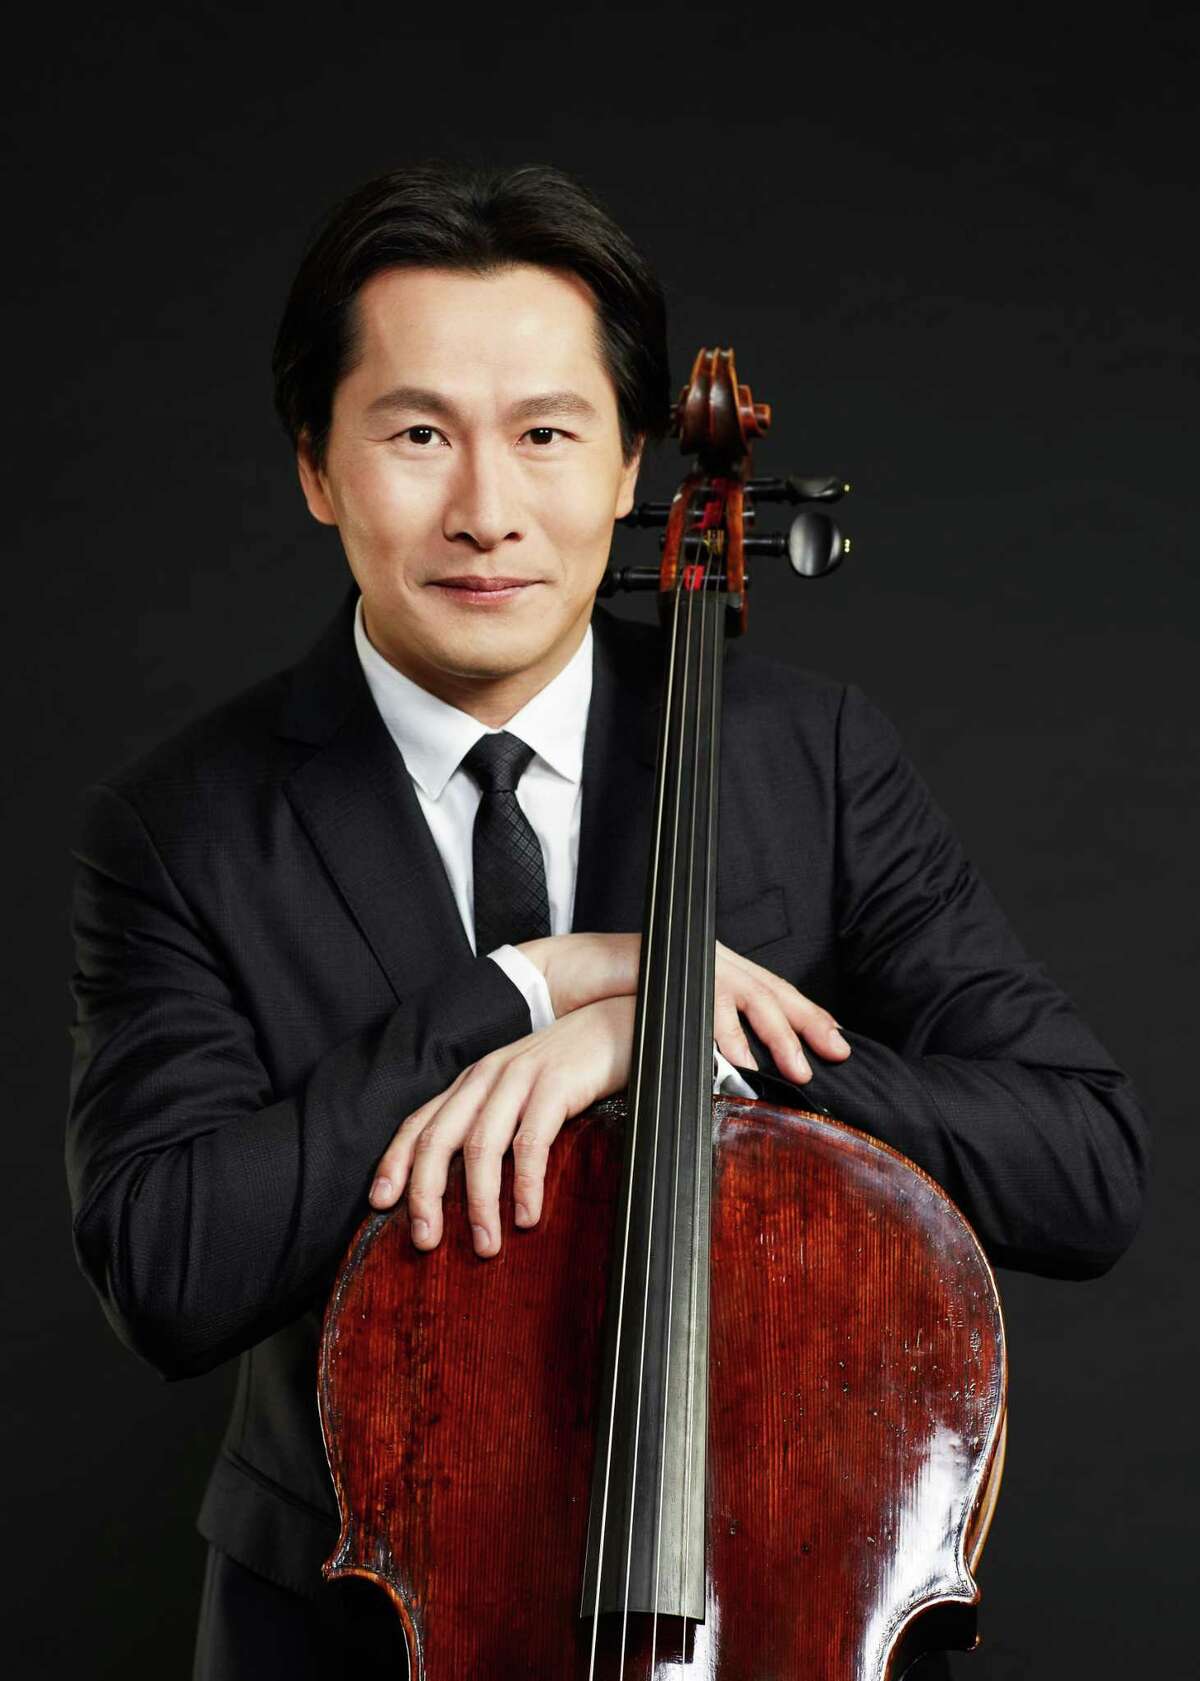 The Bruce Museum and the Greenwich Arts Council are partnering to present a concert November 6 by renowned cellist Kenneth Kuo, who will be performing works inspired by the pieces exhibited in “Contemporary Artists/Traditional Forms: Chinese Brushwork.”